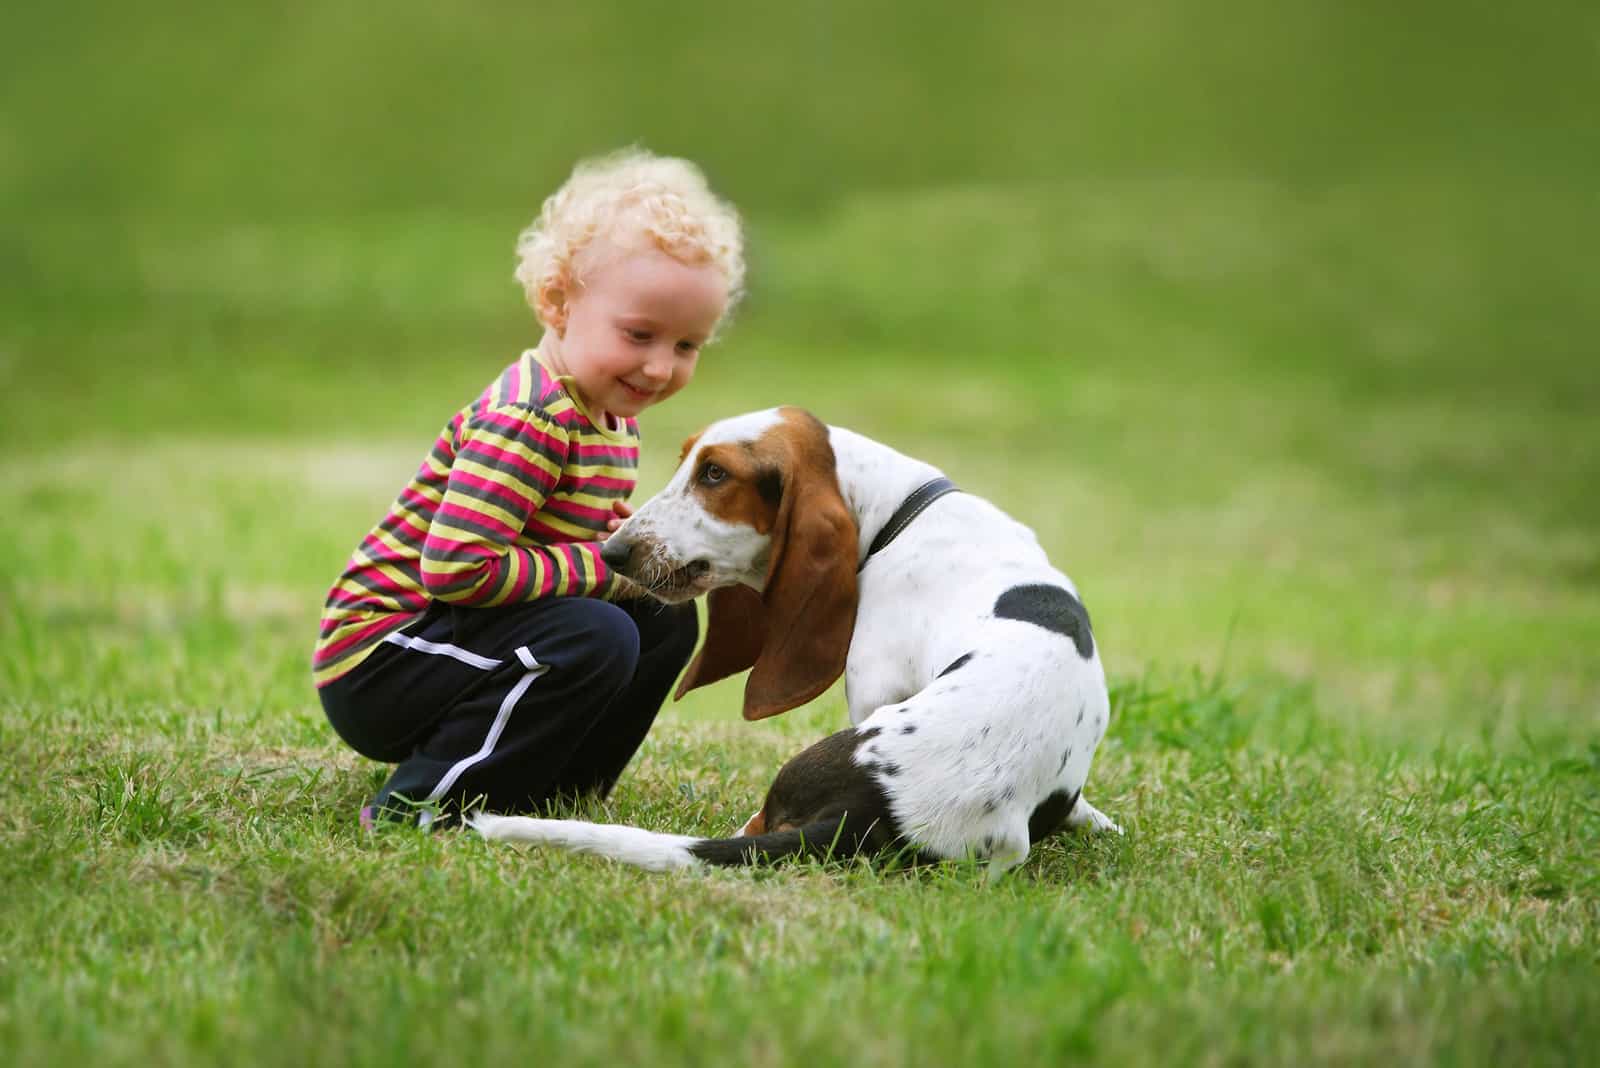 Little girl playing with a dog in the park